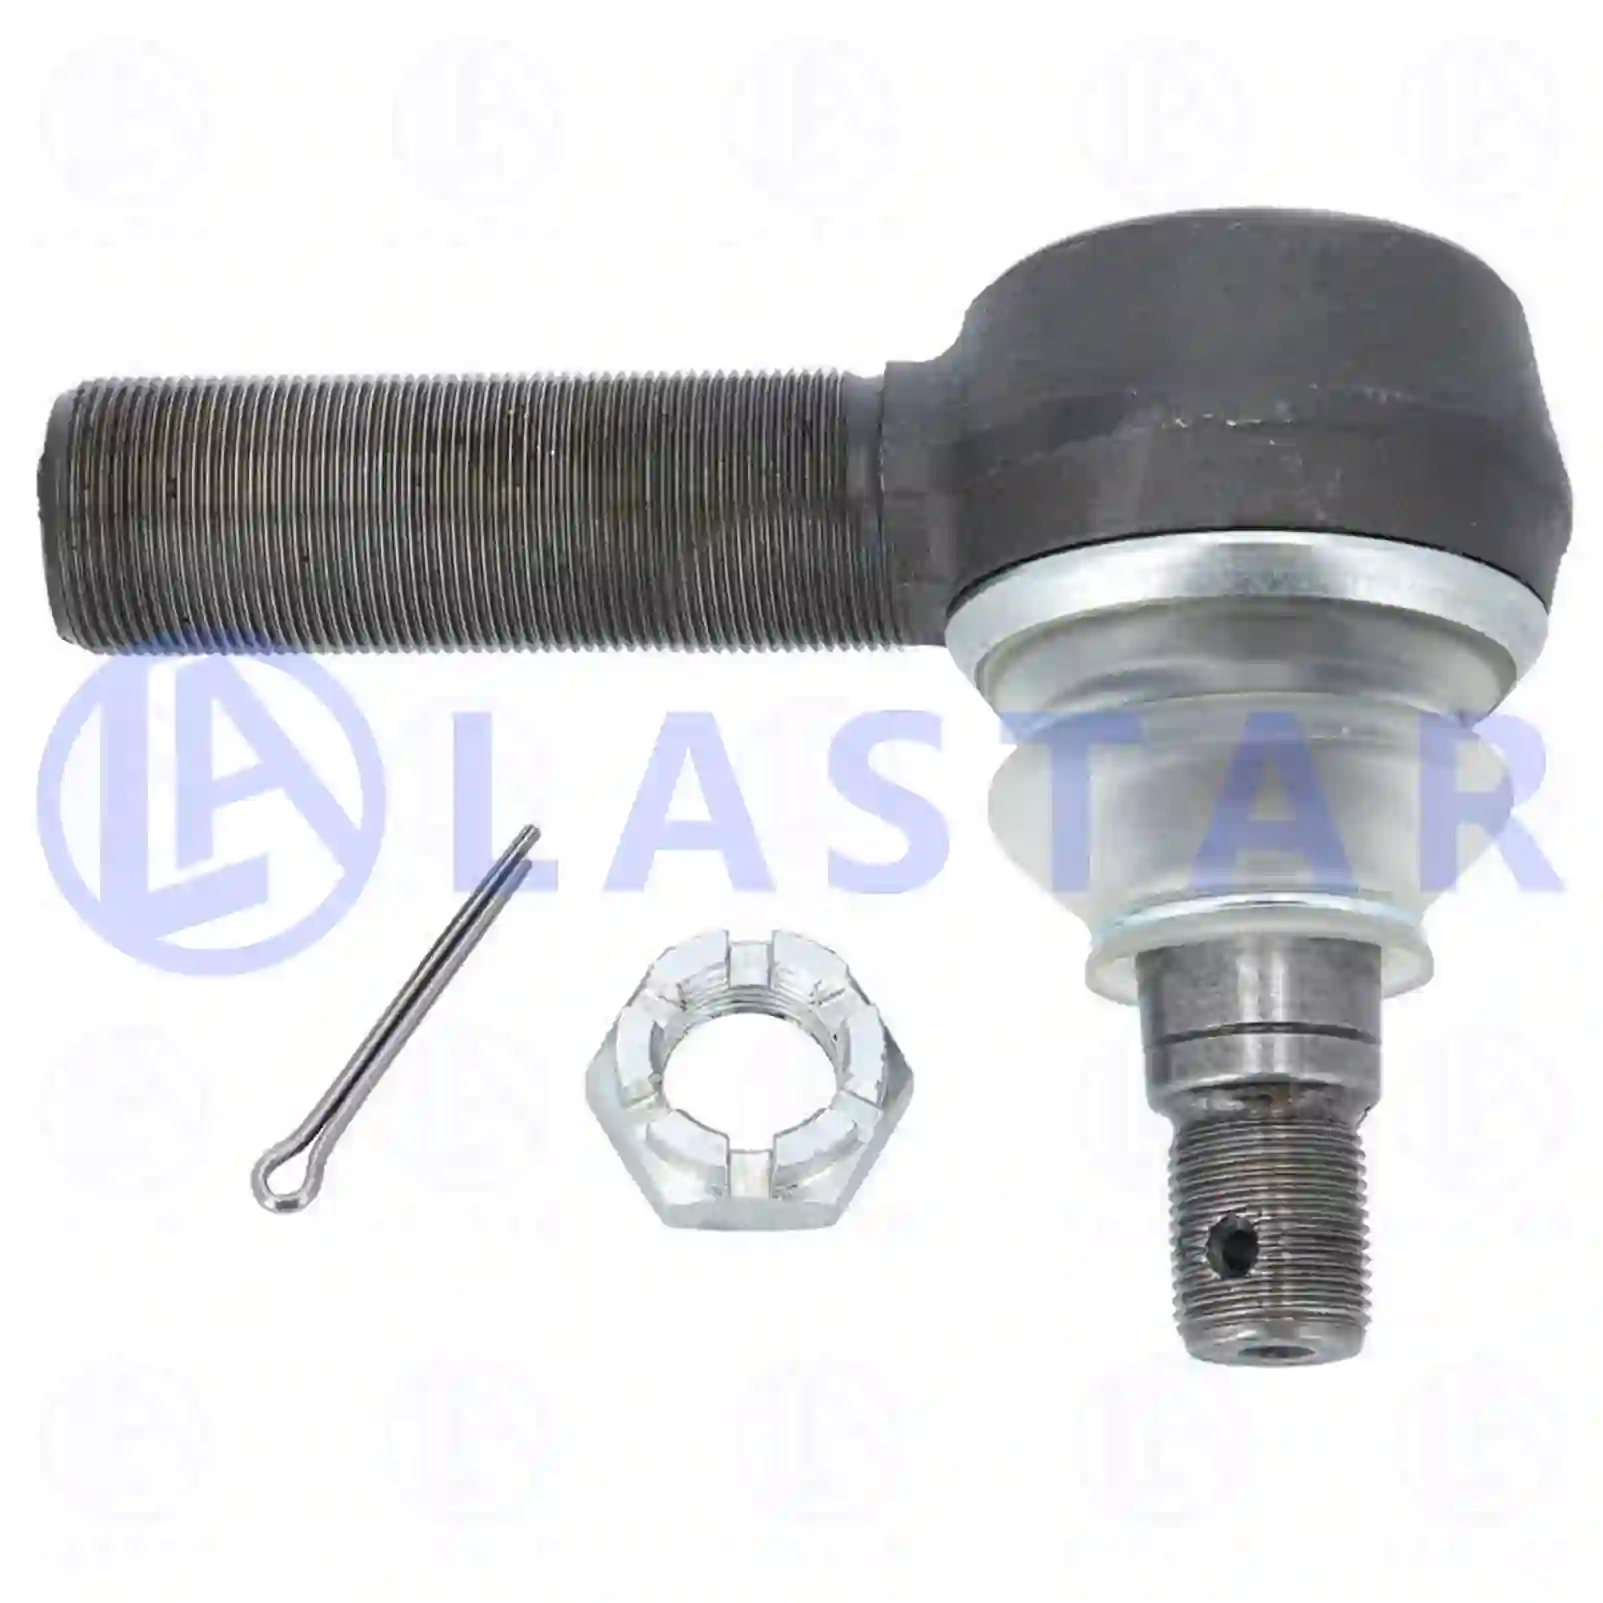 Ball joint, right hand thread, 77705368, 0069867, 0161376, 0608000, 1142173, 1326866, 161376, 608000, 69867, 02980875, 8408396, 99707030174, OG92293, 02980875, 2980875, 81953010025, 81953016151, 90804154117, 0004600148, 0004601848, 0004602648, 0004602748, 84053458, 5000295226, 5000808458, 7701002911, 6851447000, 6851478000, 6851486000, 6851488000, 6851523000, 6851533000, 6861486000, ZG40388-0008 ||  77705368 Lastar Spare Part | Truck Spare Parts, Auotomotive Spare Parts Ball joint, right hand thread, 77705368, 0069867, 0161376, 0608000, 1142173, 1326866, 161376, 608000, 69867, 02980875, 8408396, 99707030174, OG92293, 02980875, 2980875, 81953010025, 81953016151, 90804154117, 0004600148, 0004601848, 0004602648, 0004602748, 84053458, 5000295226, 5000808458, 7701002911, 6851447000, 6851478000, 6851486000, 6851488000, 6851523000, 6851533000, 6861486000, ZG40388-0008 ||  77705368 Lastar Spare Part | Truck Spare Parts, Auotomotive Spare Parts